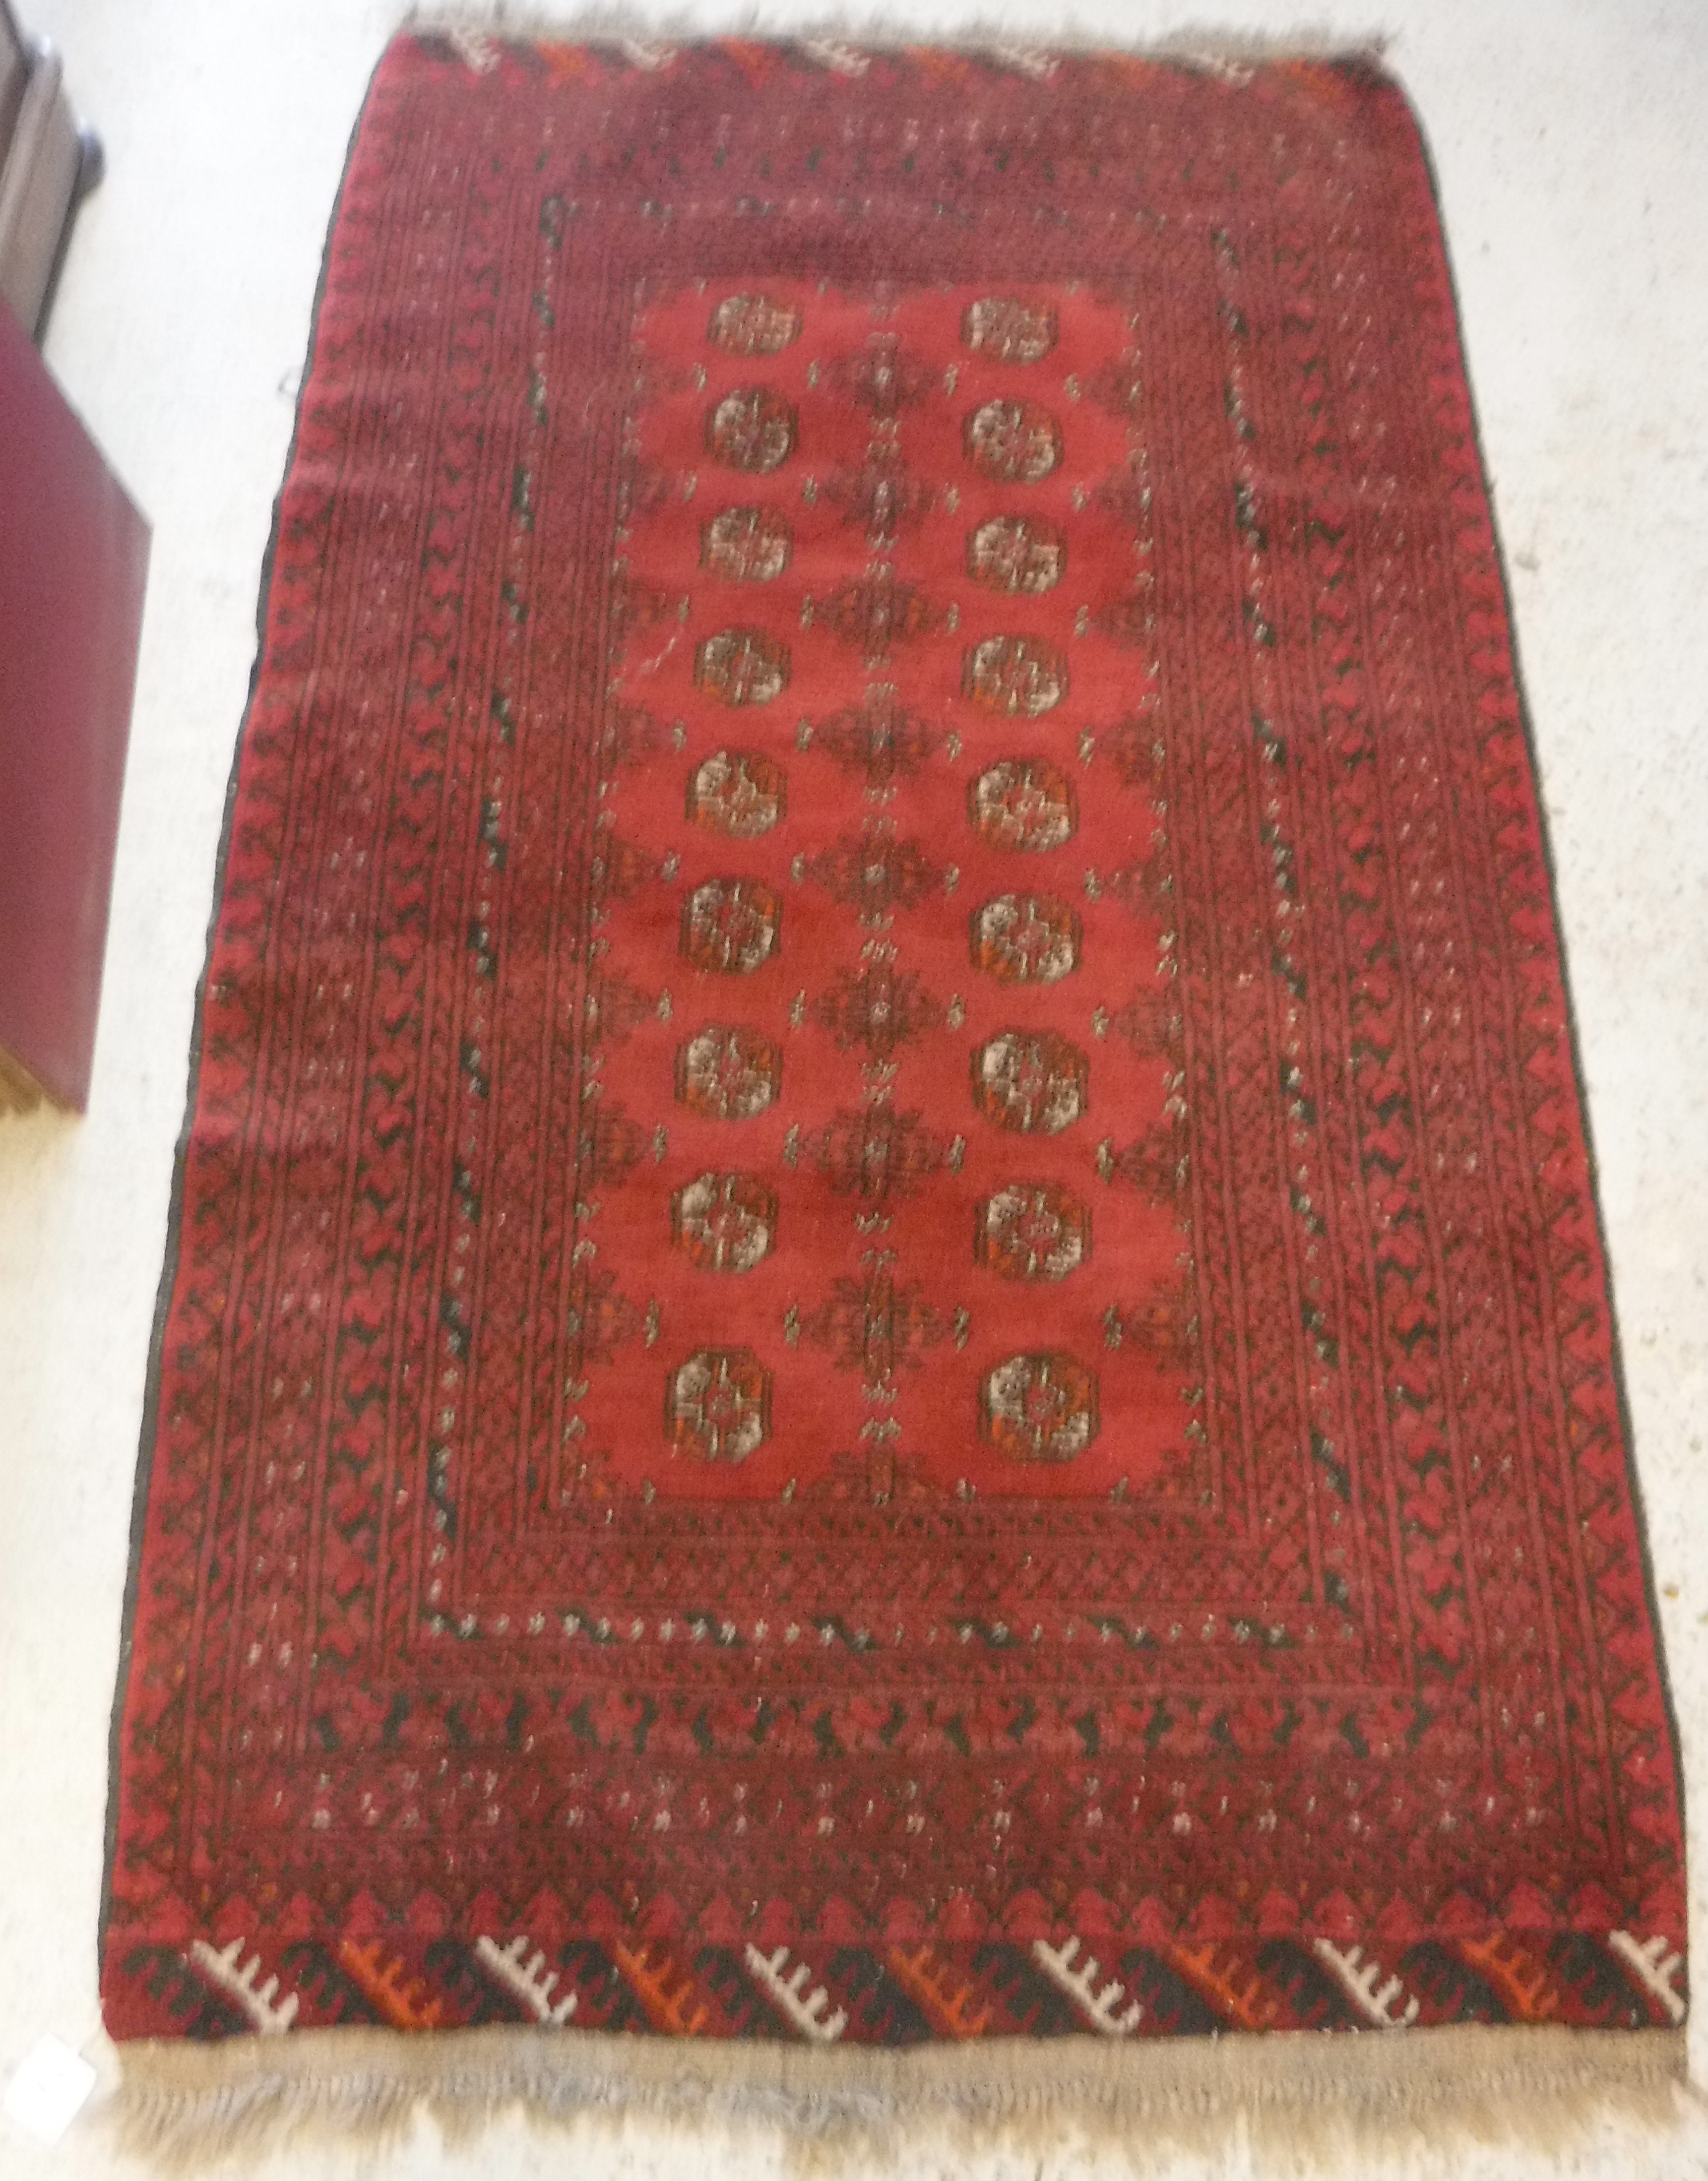 A Turkamen rug with repeating elephant f